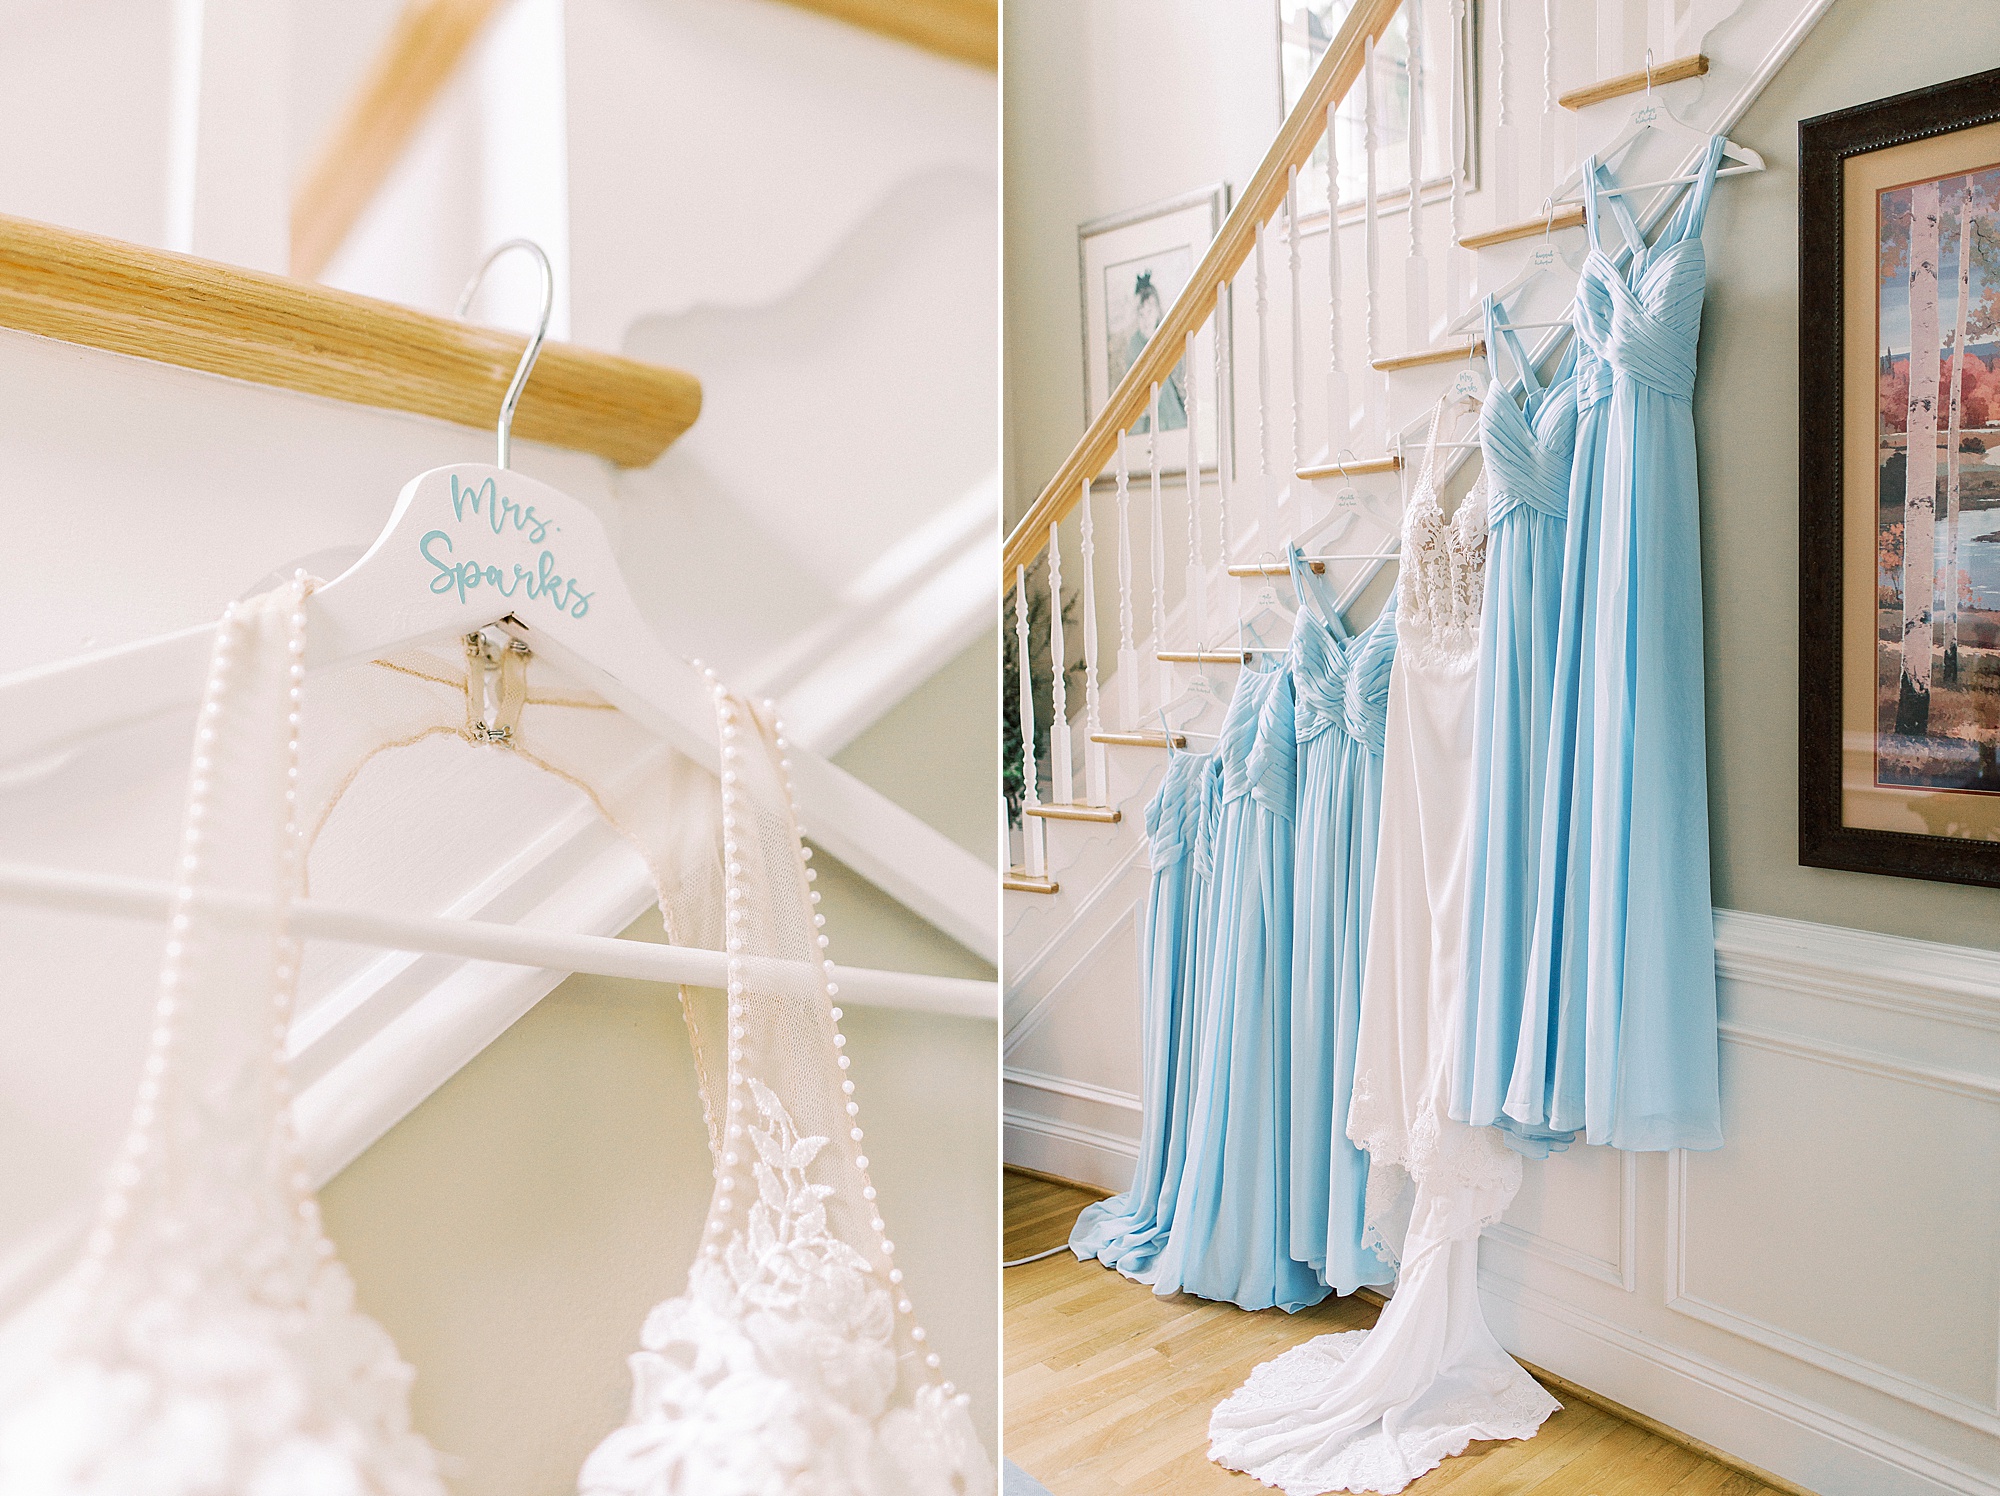 wedding dress hangs on staircase in home